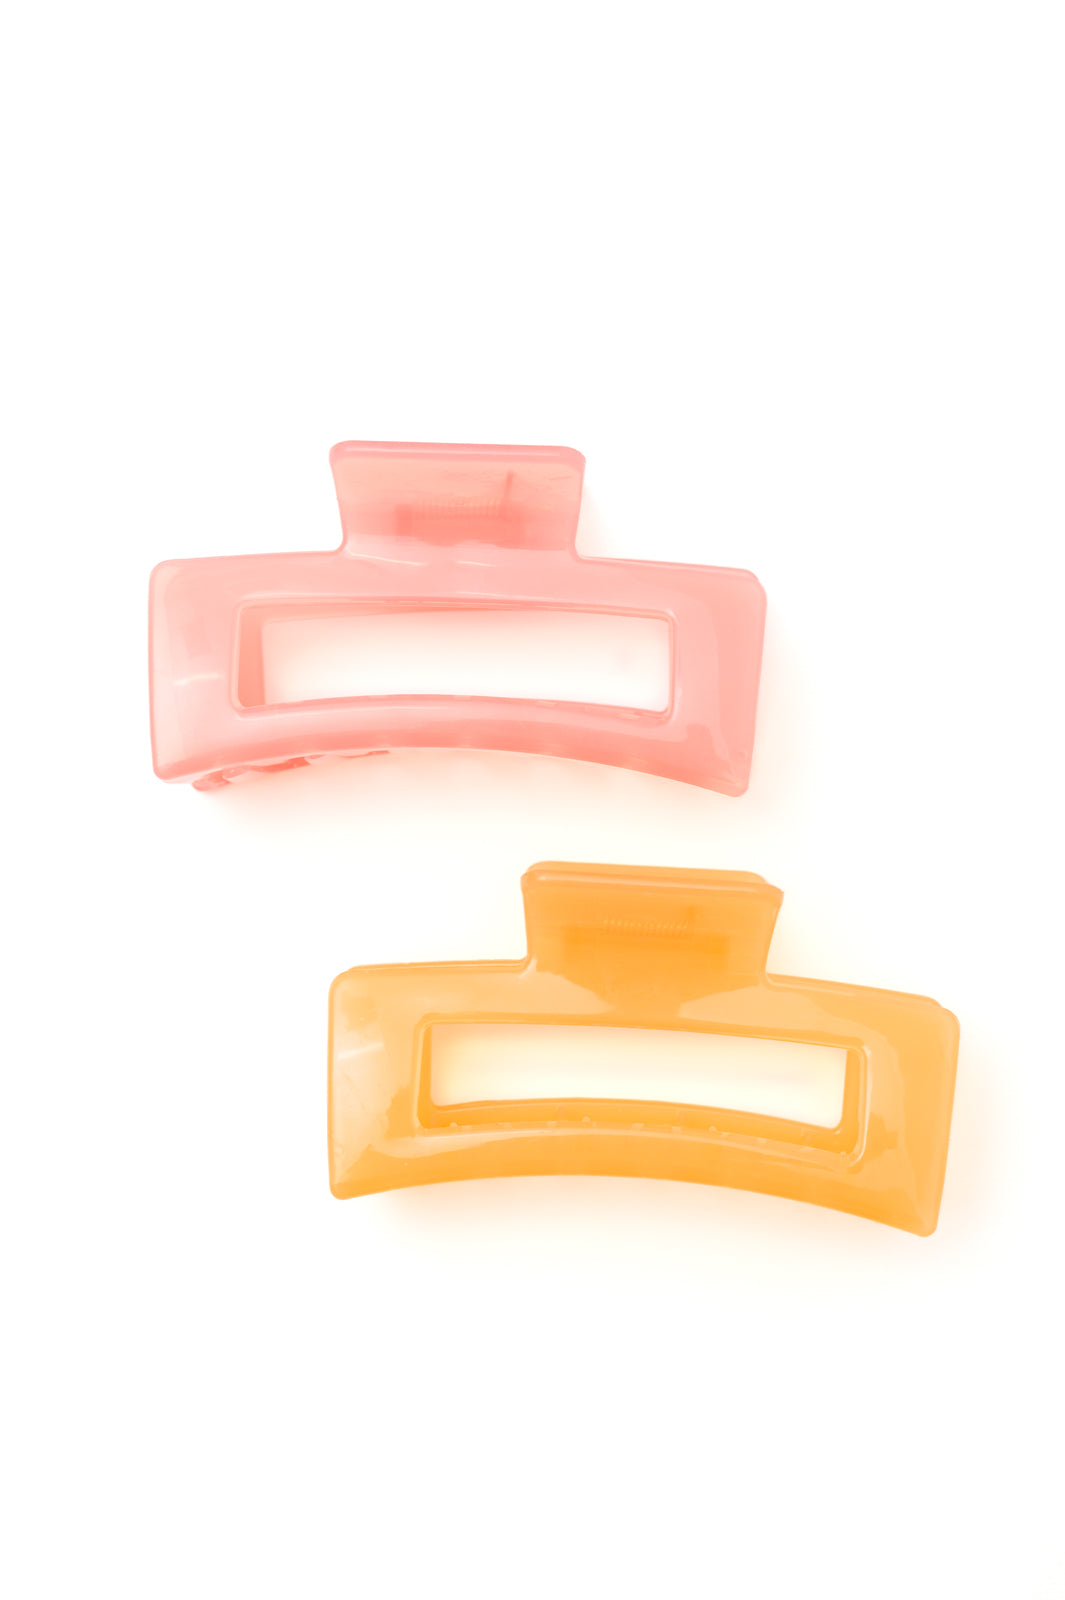 Jelly Rectangle Claw Clip in Watermelon Ave Shops